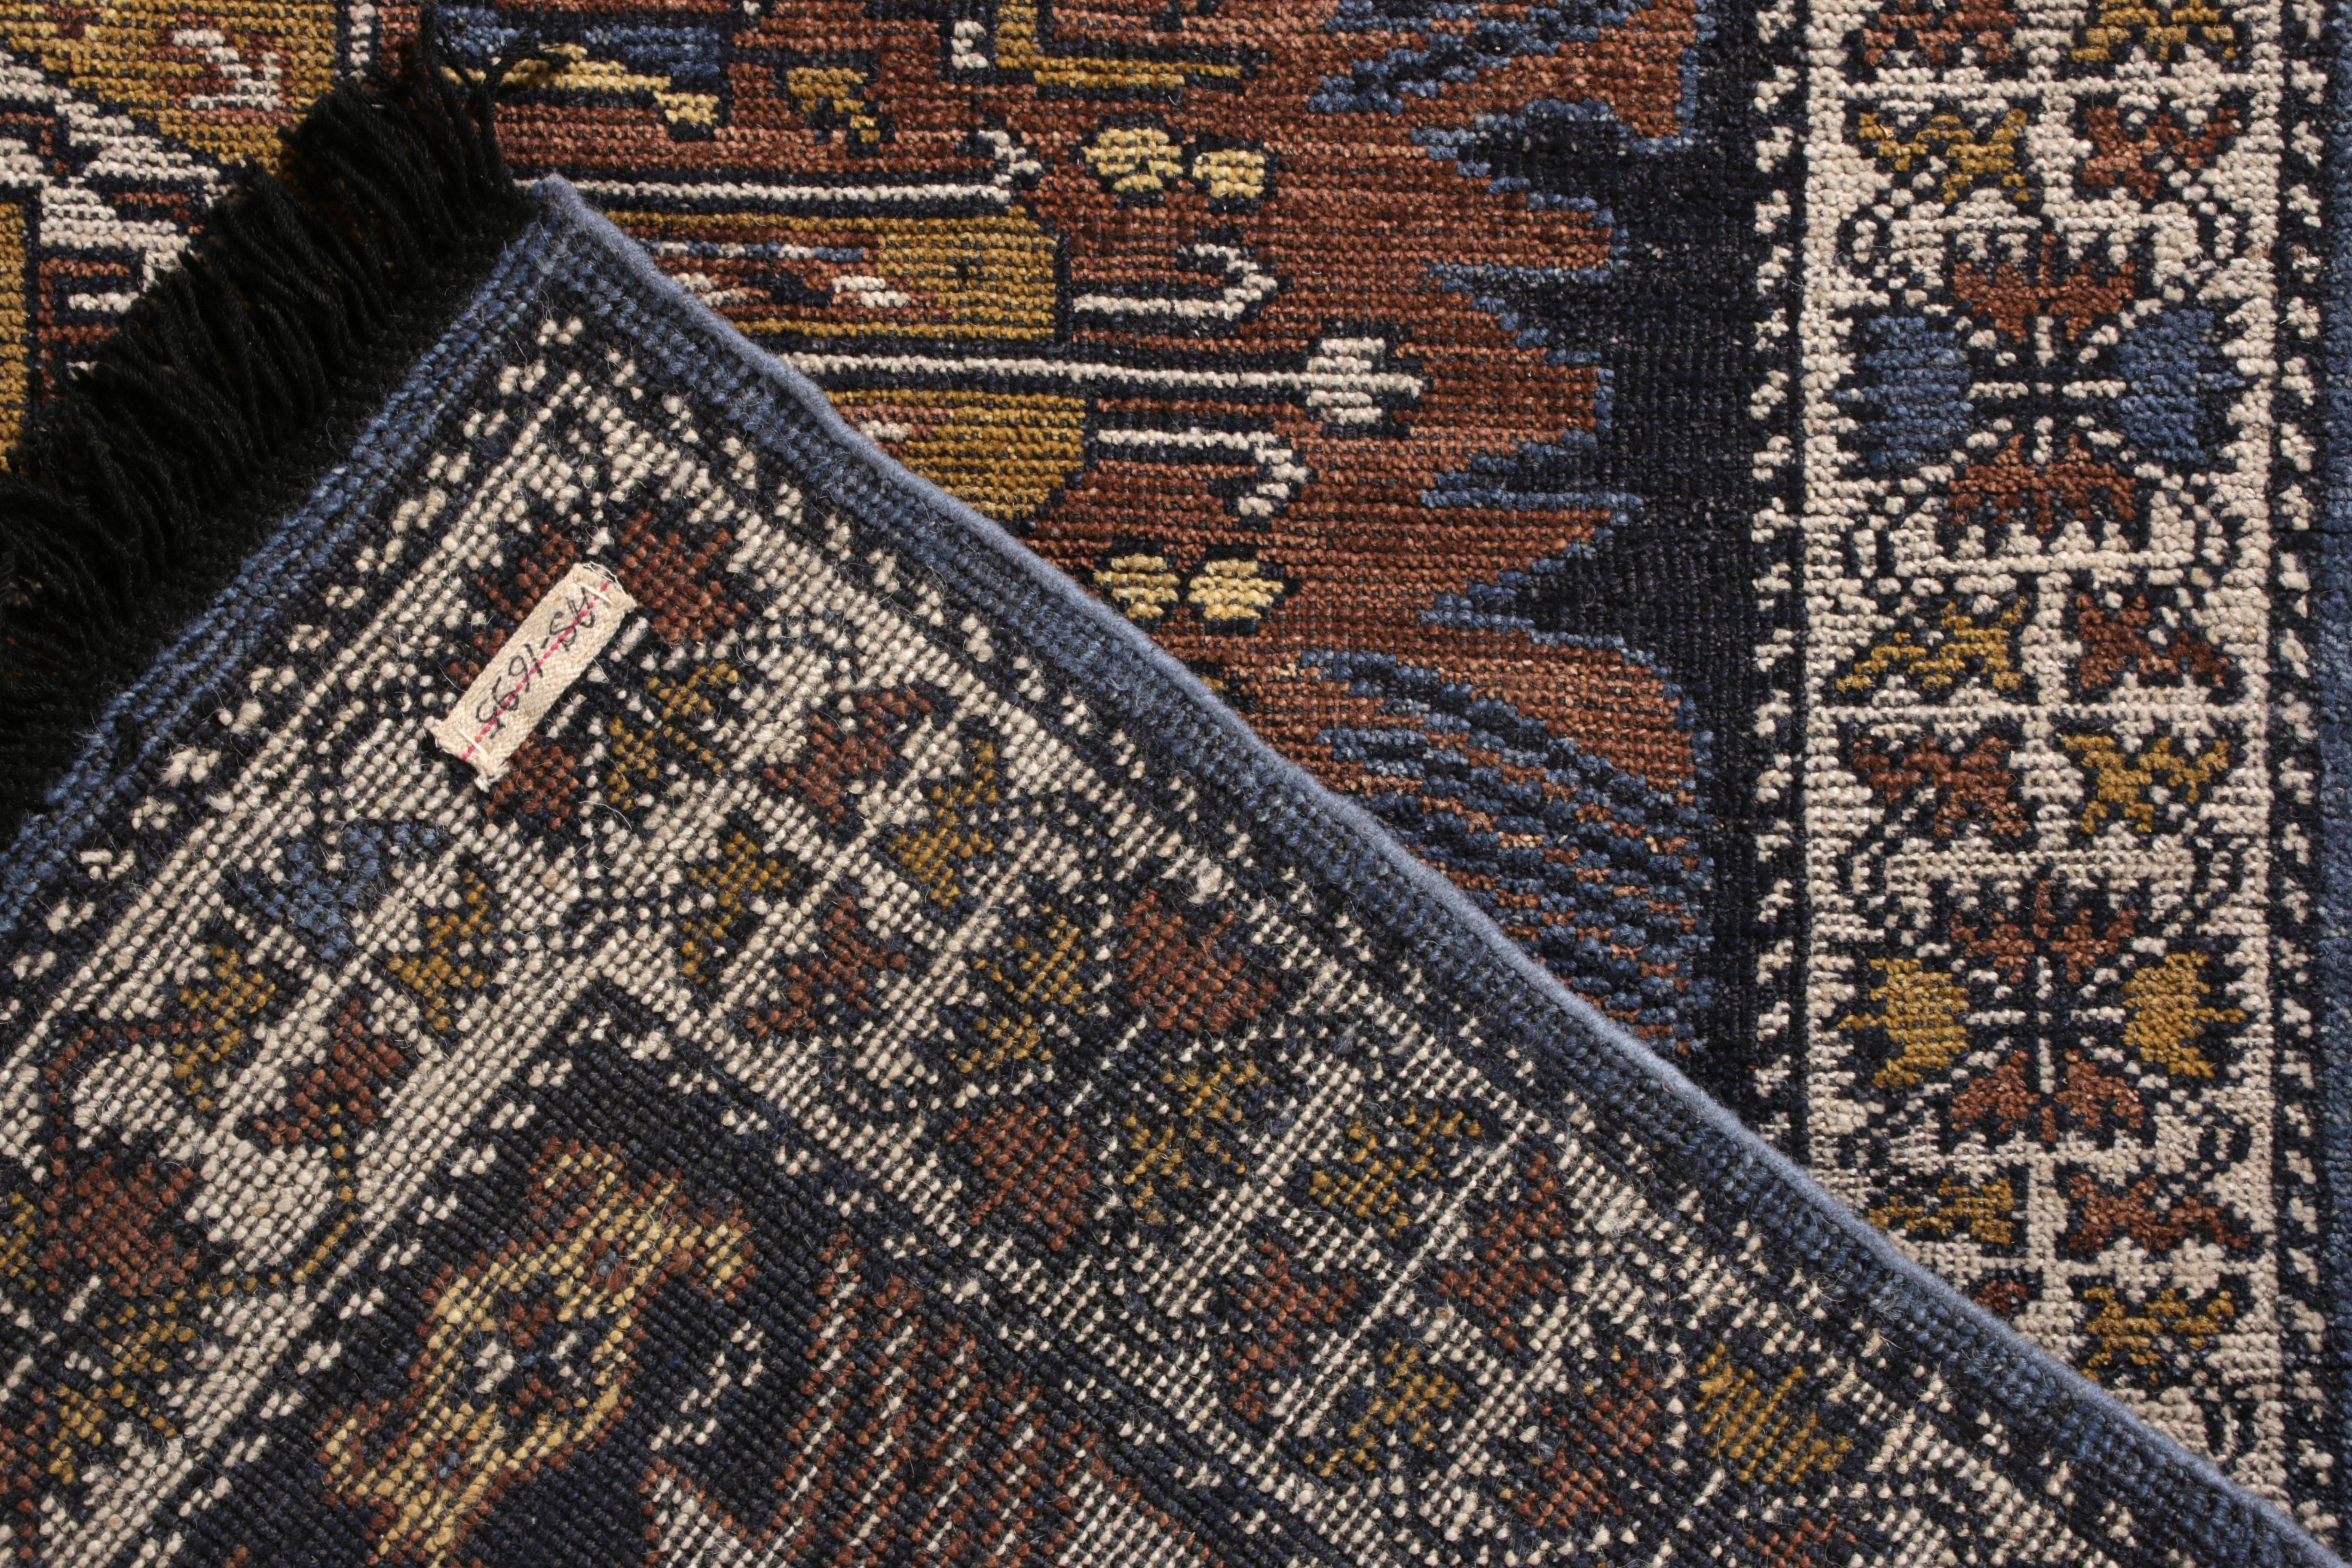 Rug & Kilim’s Tribal Style Rug in Beige-Brown and Blue Geometric Pattern In New Condition For Sale In Long Island City, NY